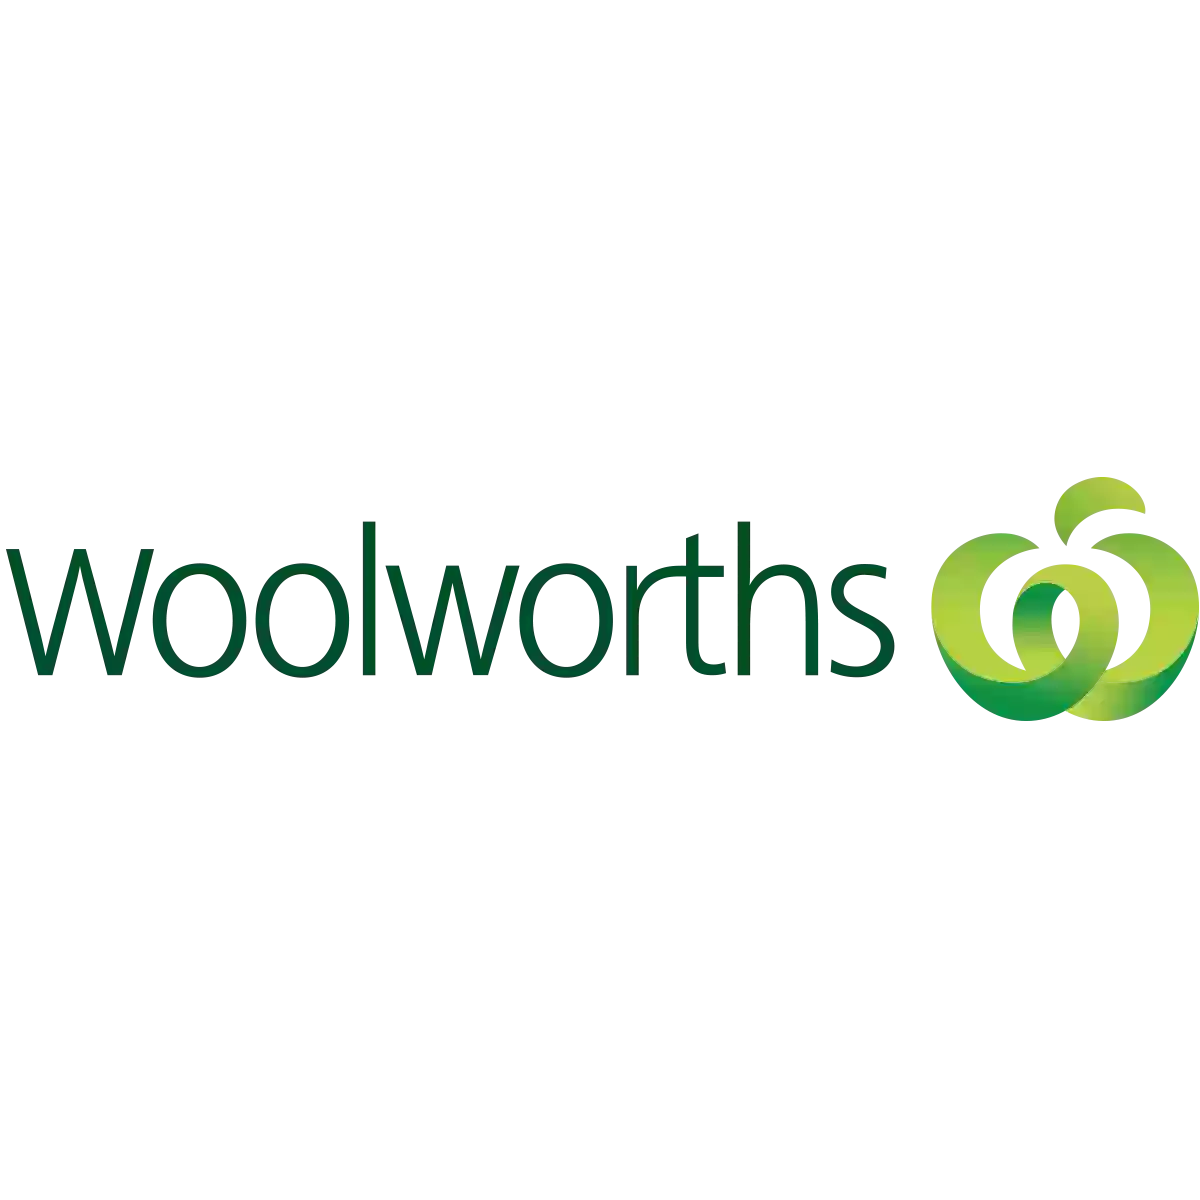 Woolworths Hornsby